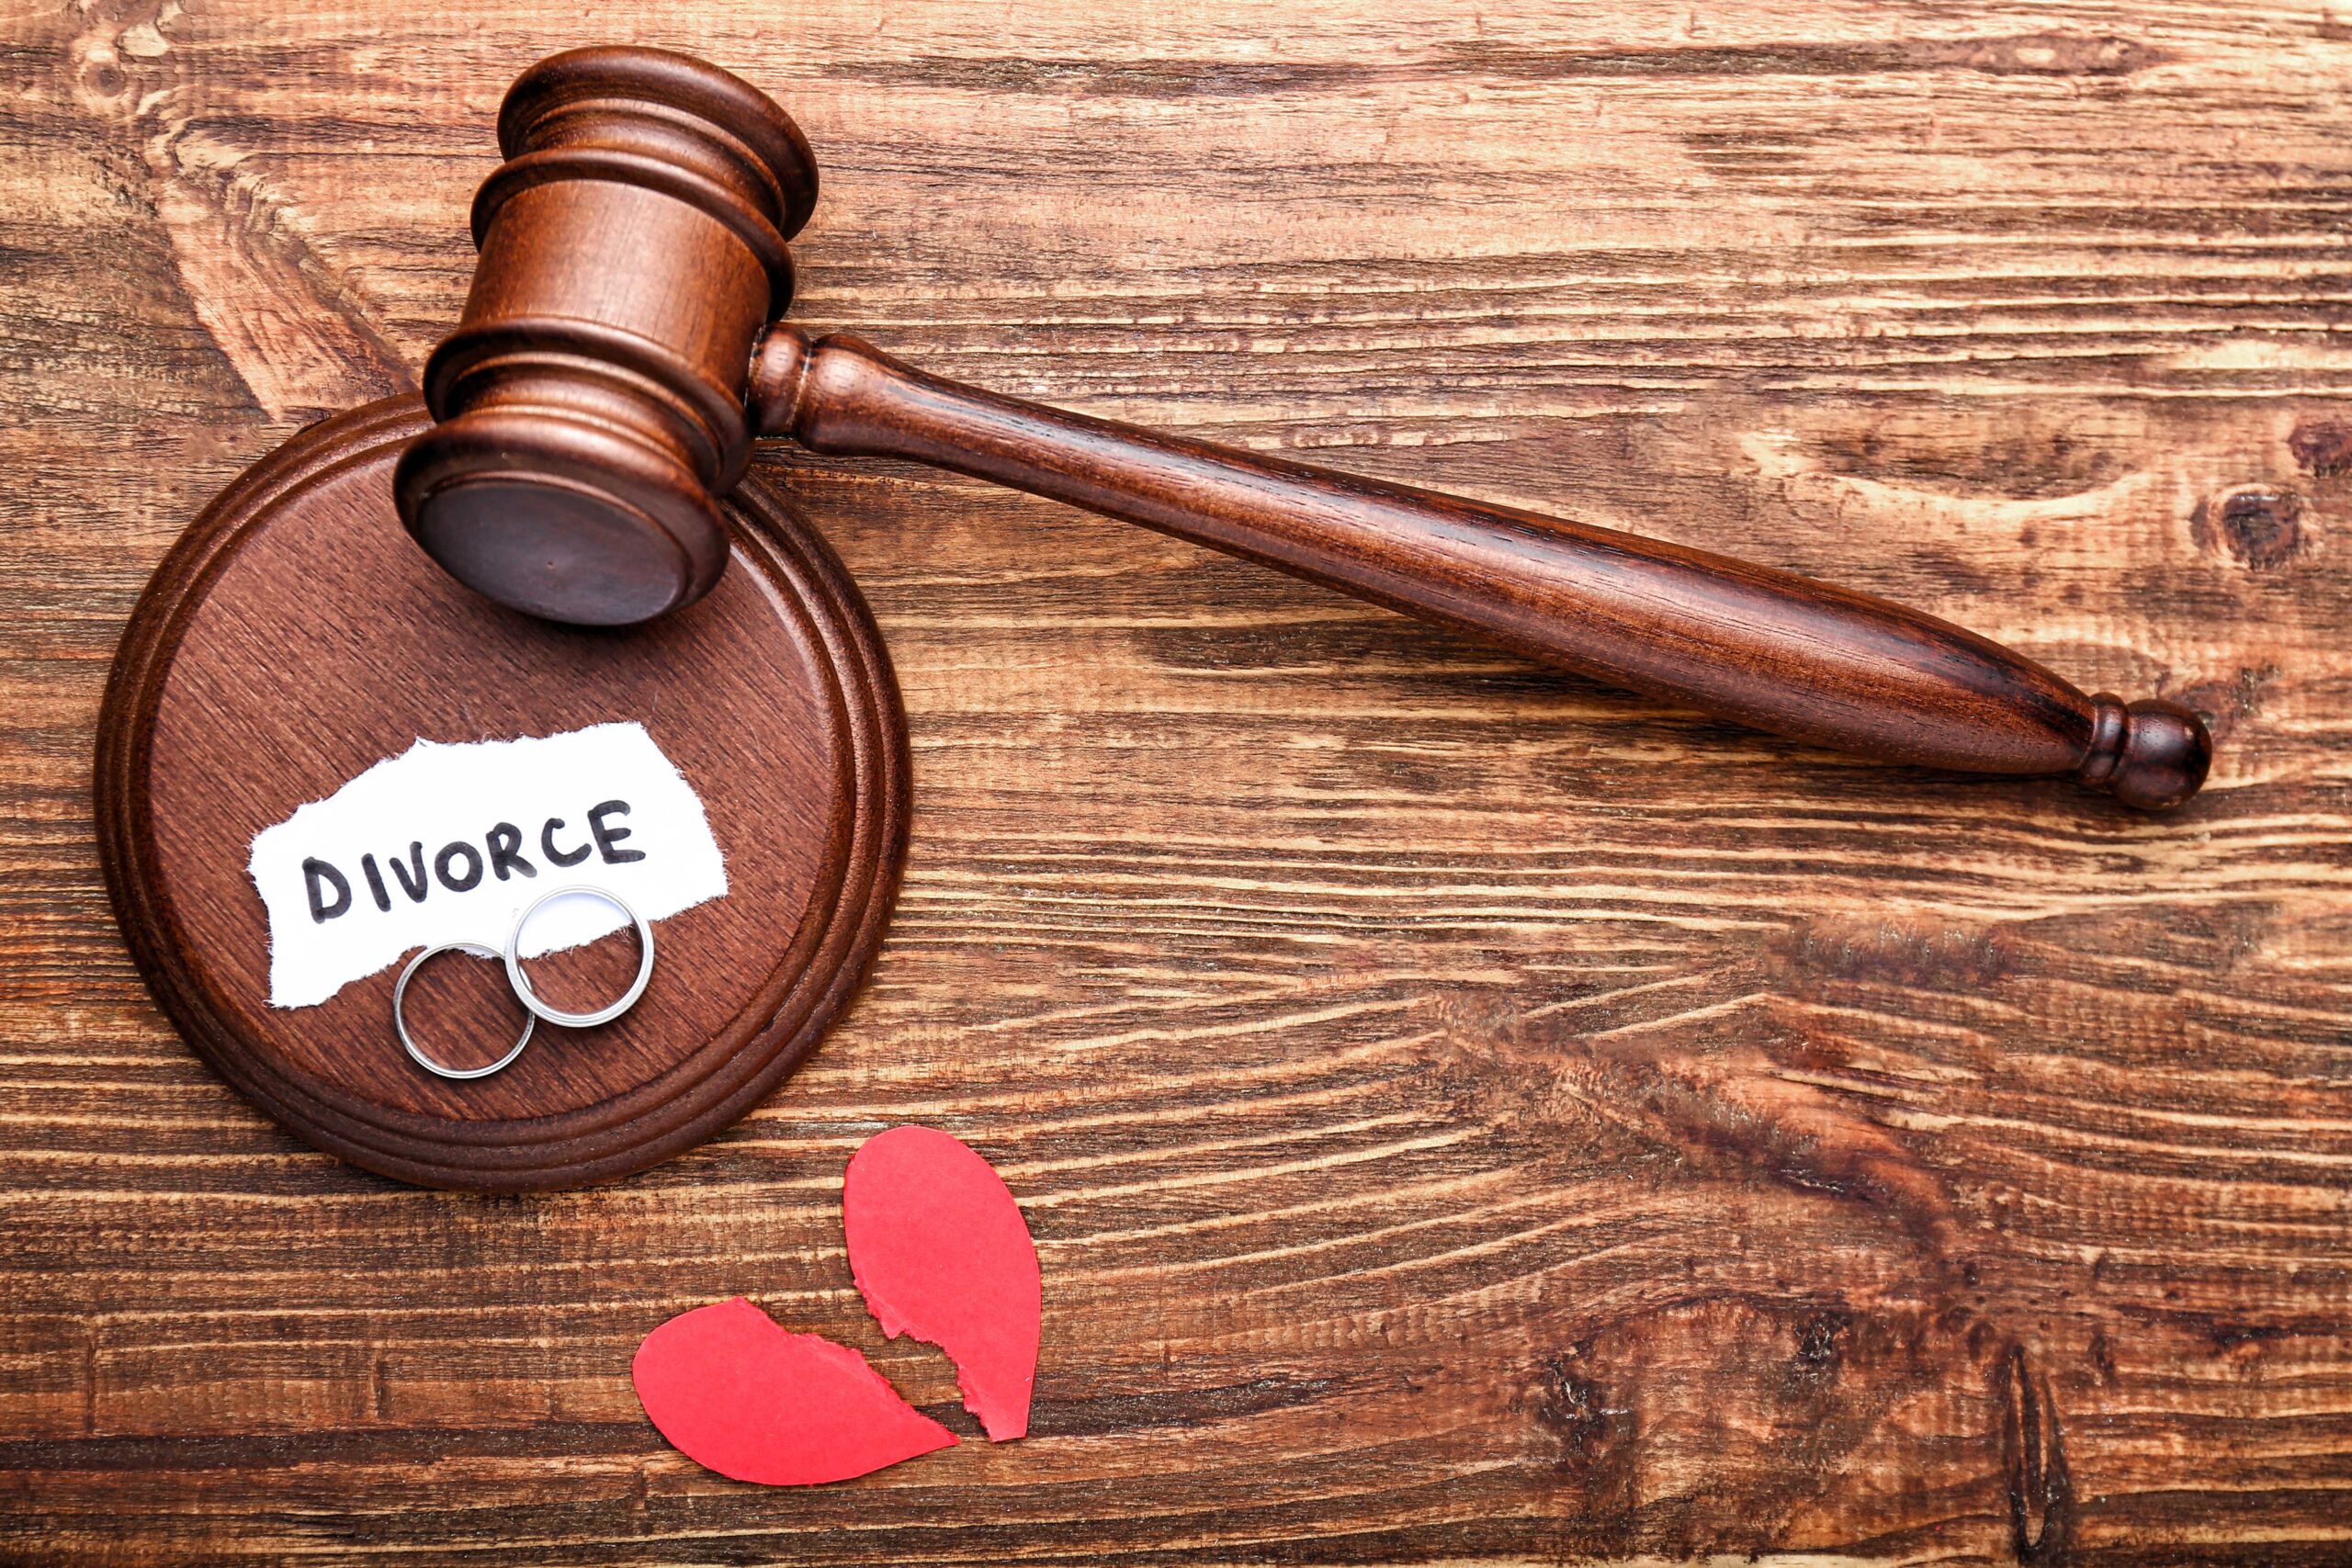 The role of financial advice in the divorce process